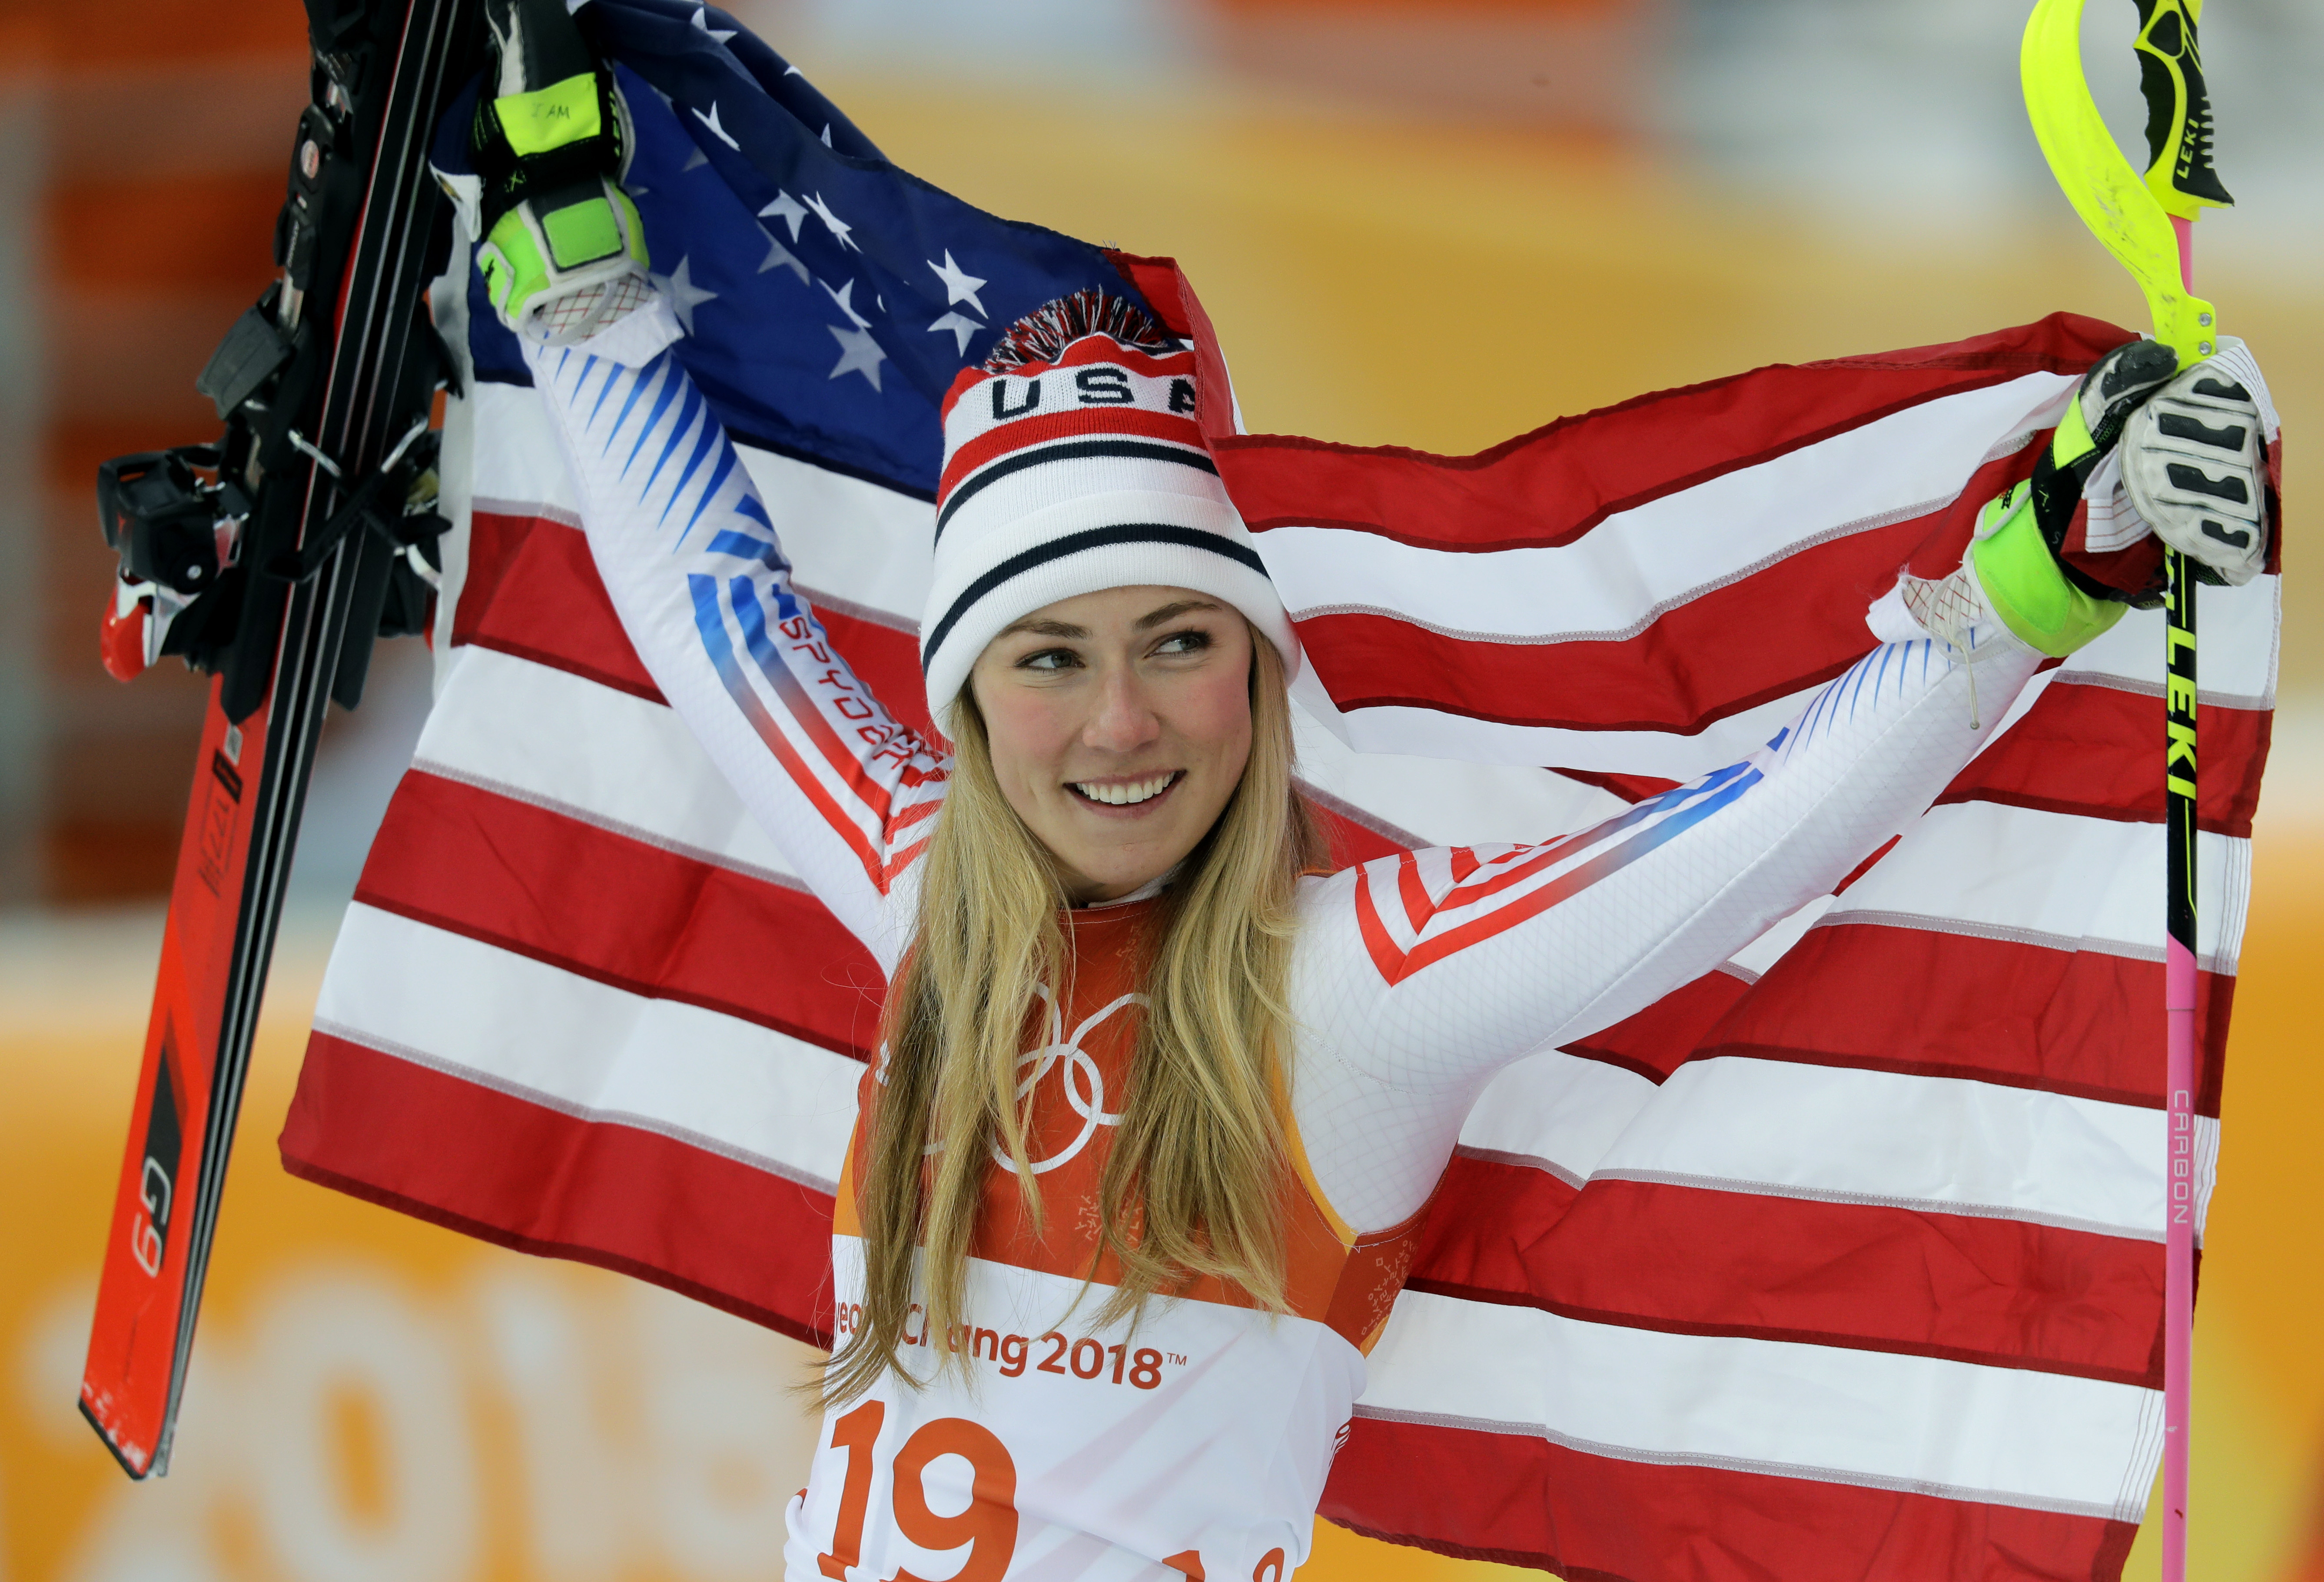 Winter Olympics skiing schedule Live stream, TV, how to watch Mikaela Shiffrin